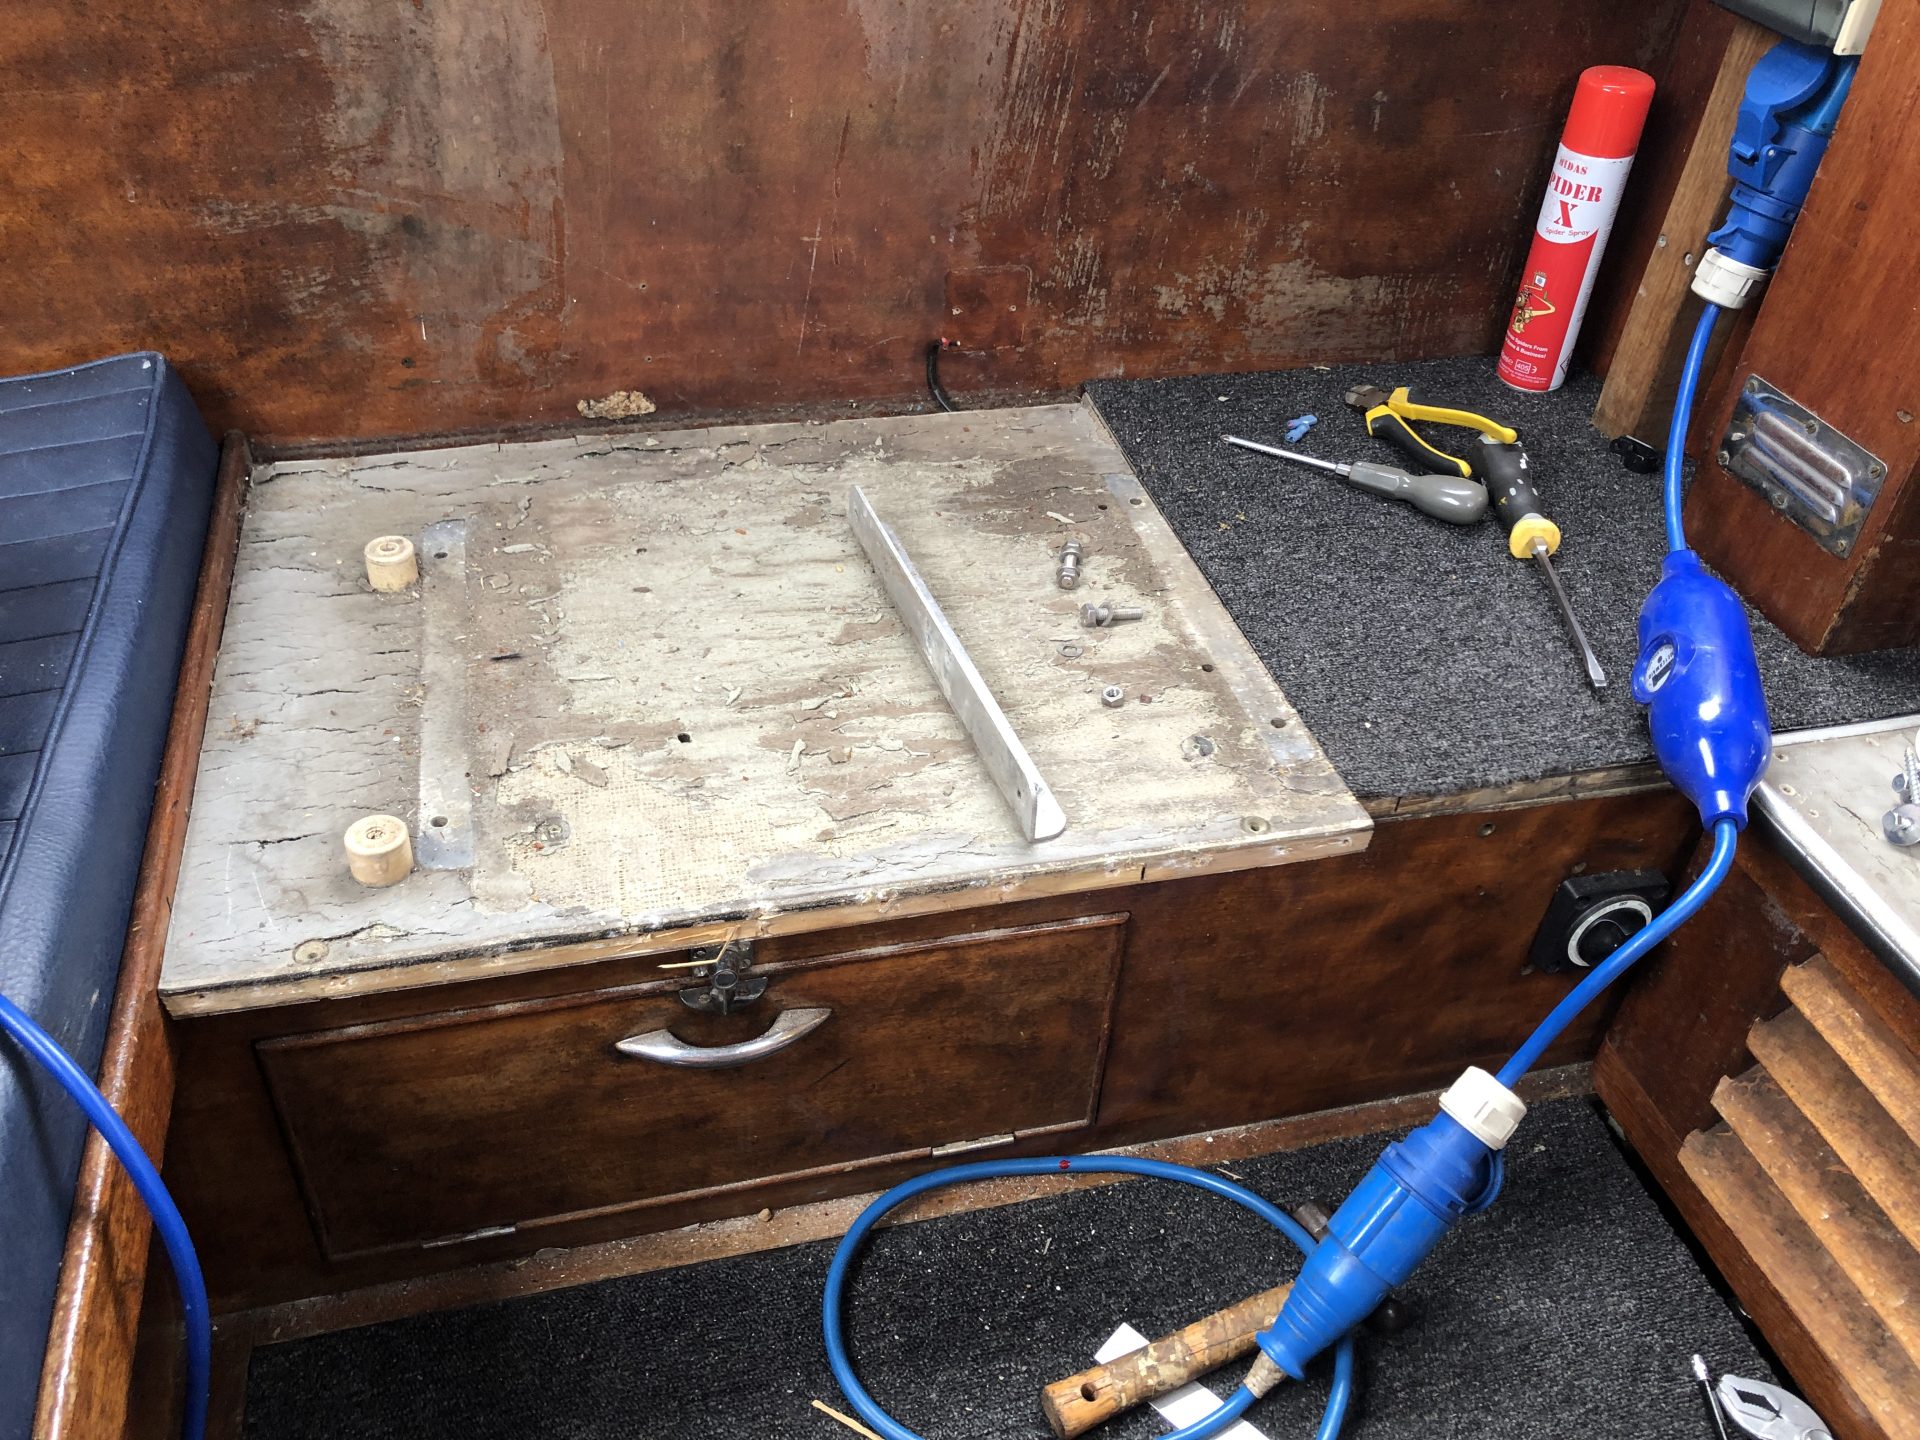 Helm plinth with the old seat and fridge box removed, show the horrible blockboard laminated flooring prior to removal